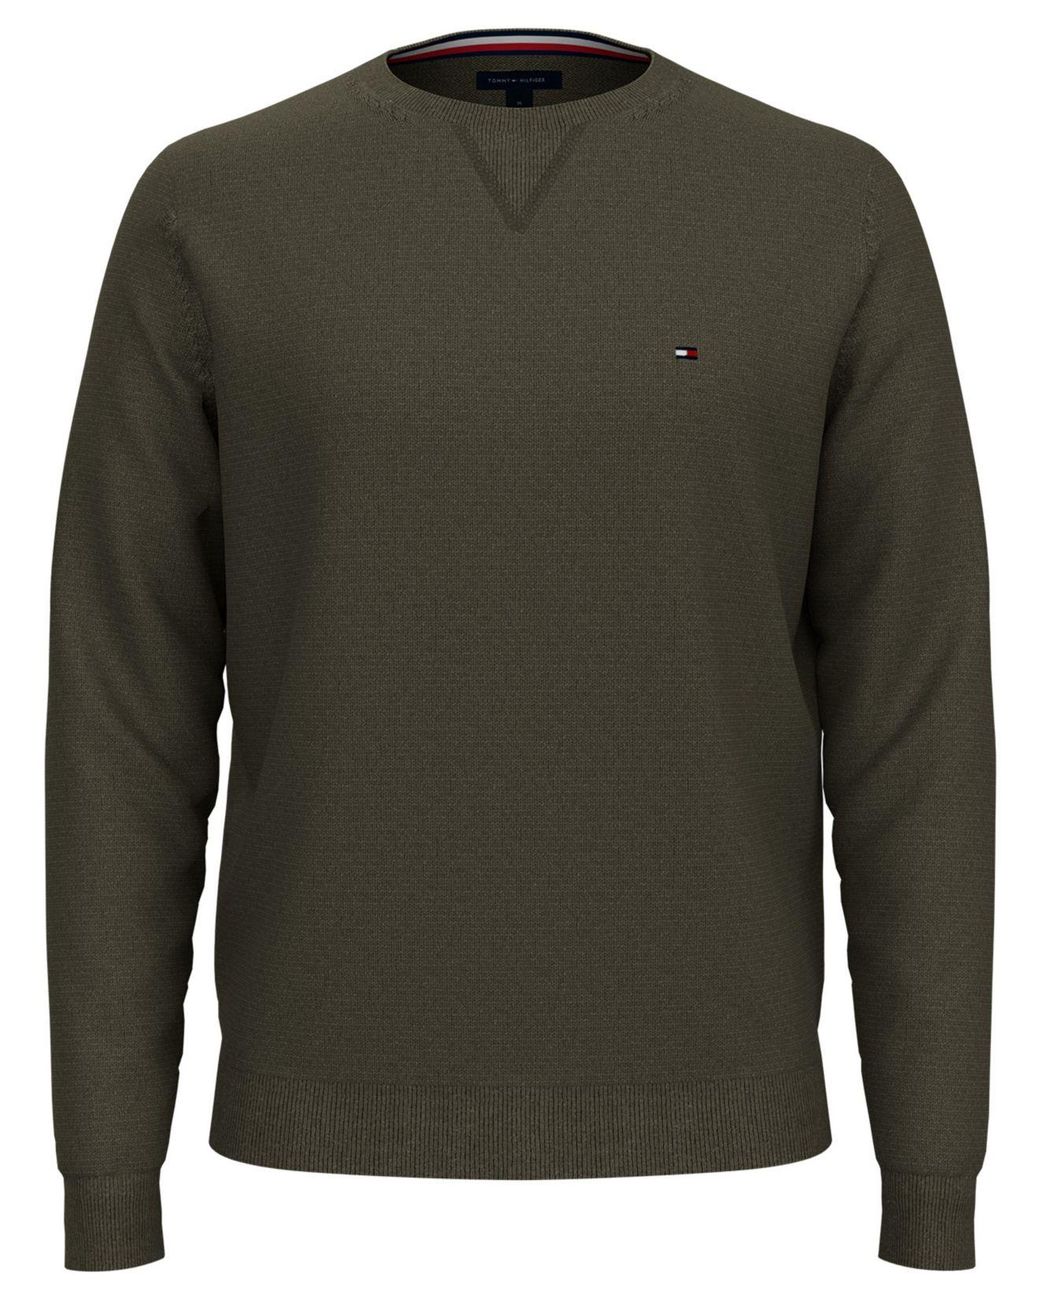 Tommy Hilfiger Cotton Signature Solid Crew Neck Sweater in Army Green ...